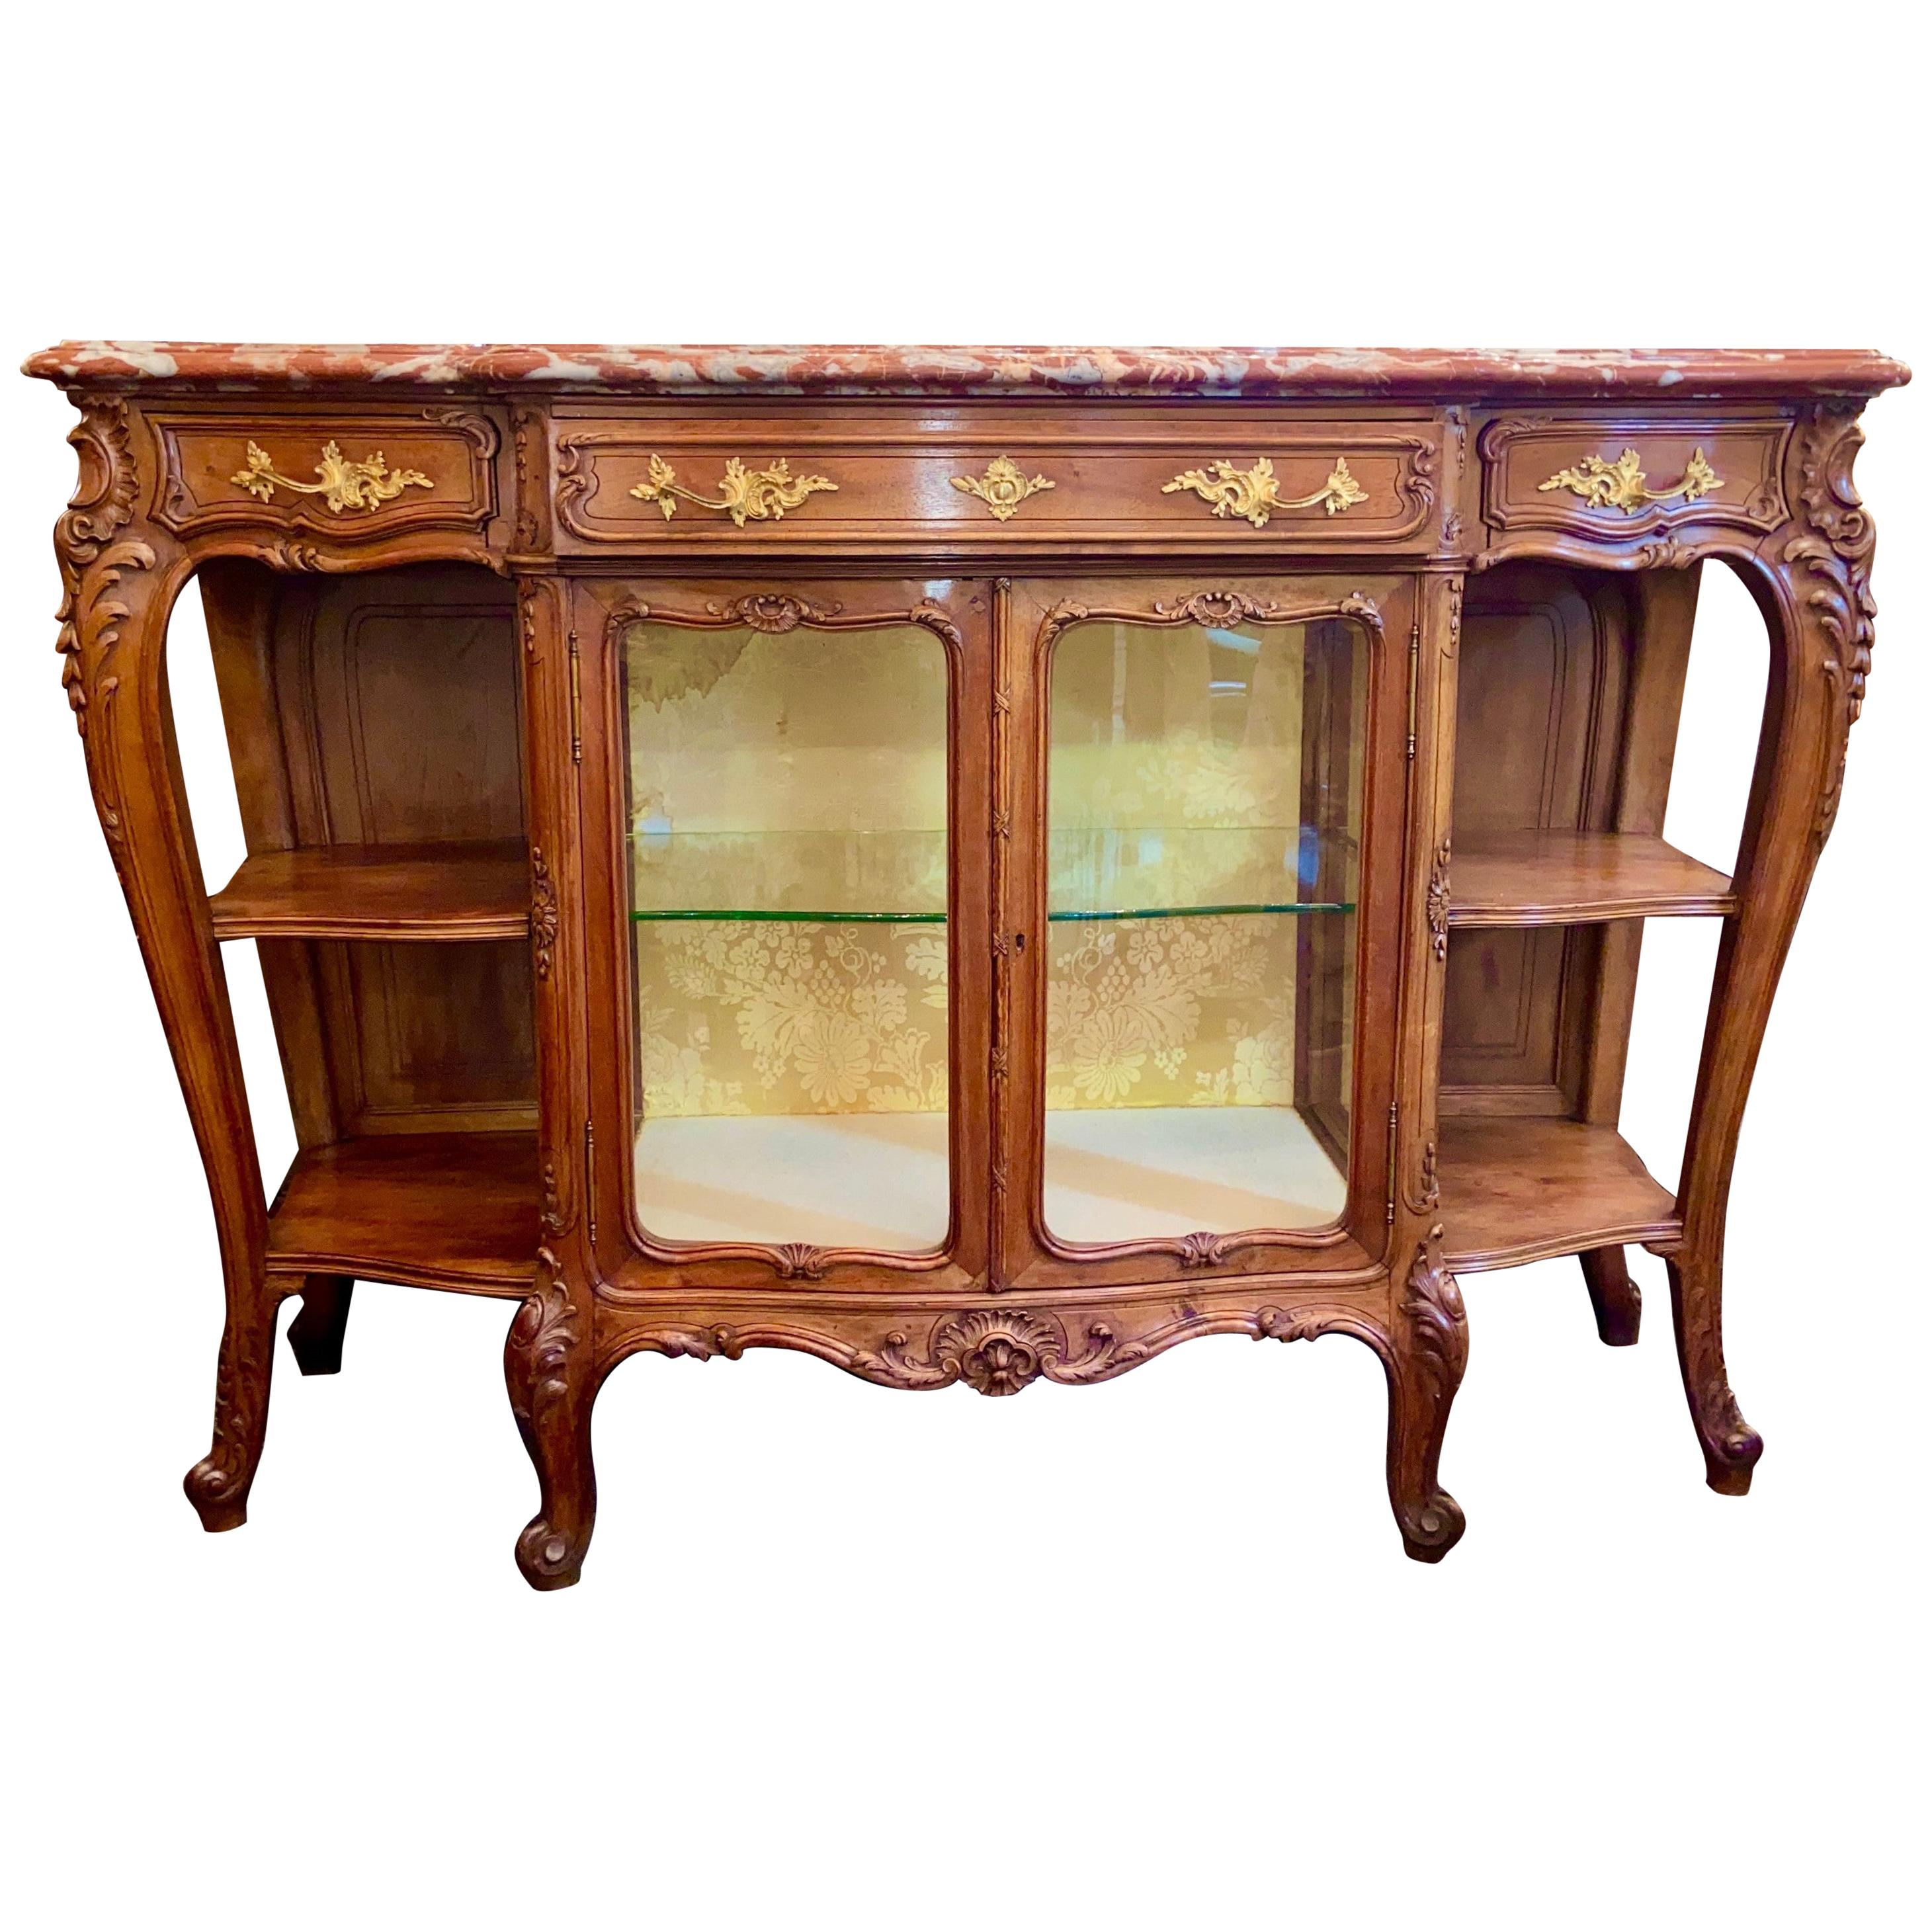 Antique French Rouge Marble-Top Walnut Buffet with Glass Doors, Circa 1890-1910